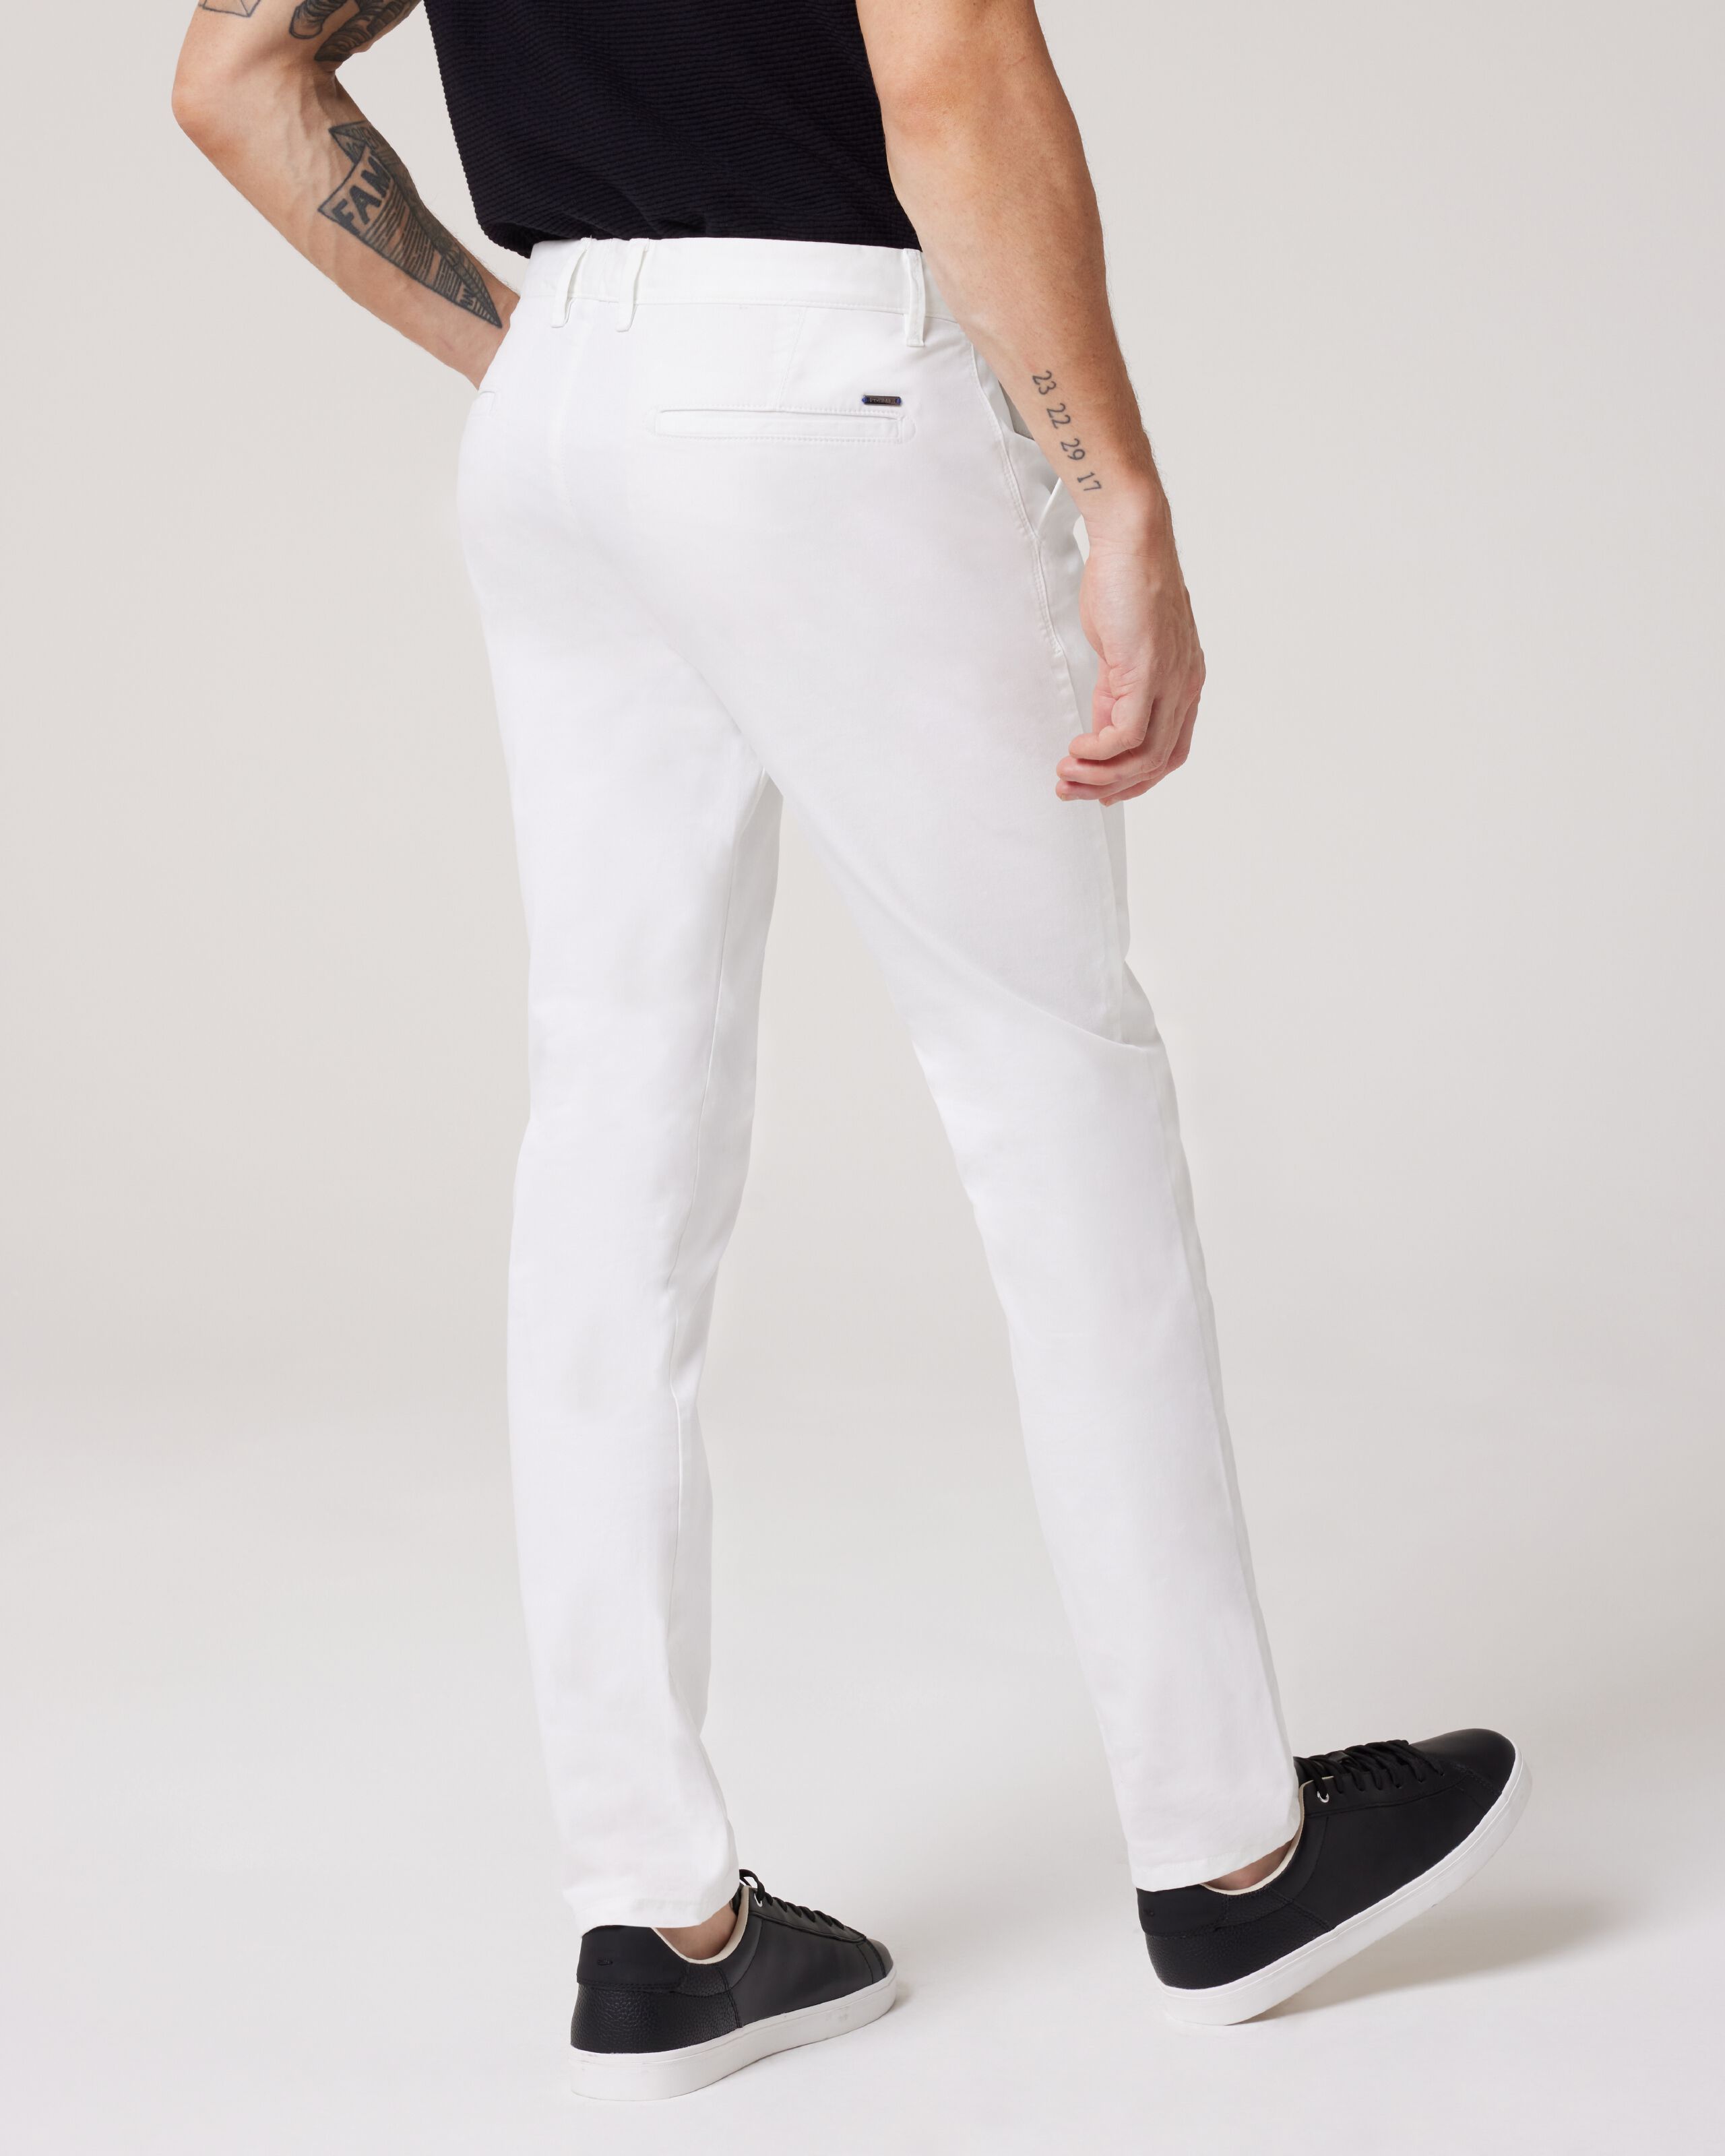 Buy AD by Arvind Modern Slim Fit Mid Rise Chinos - NNNOW.com